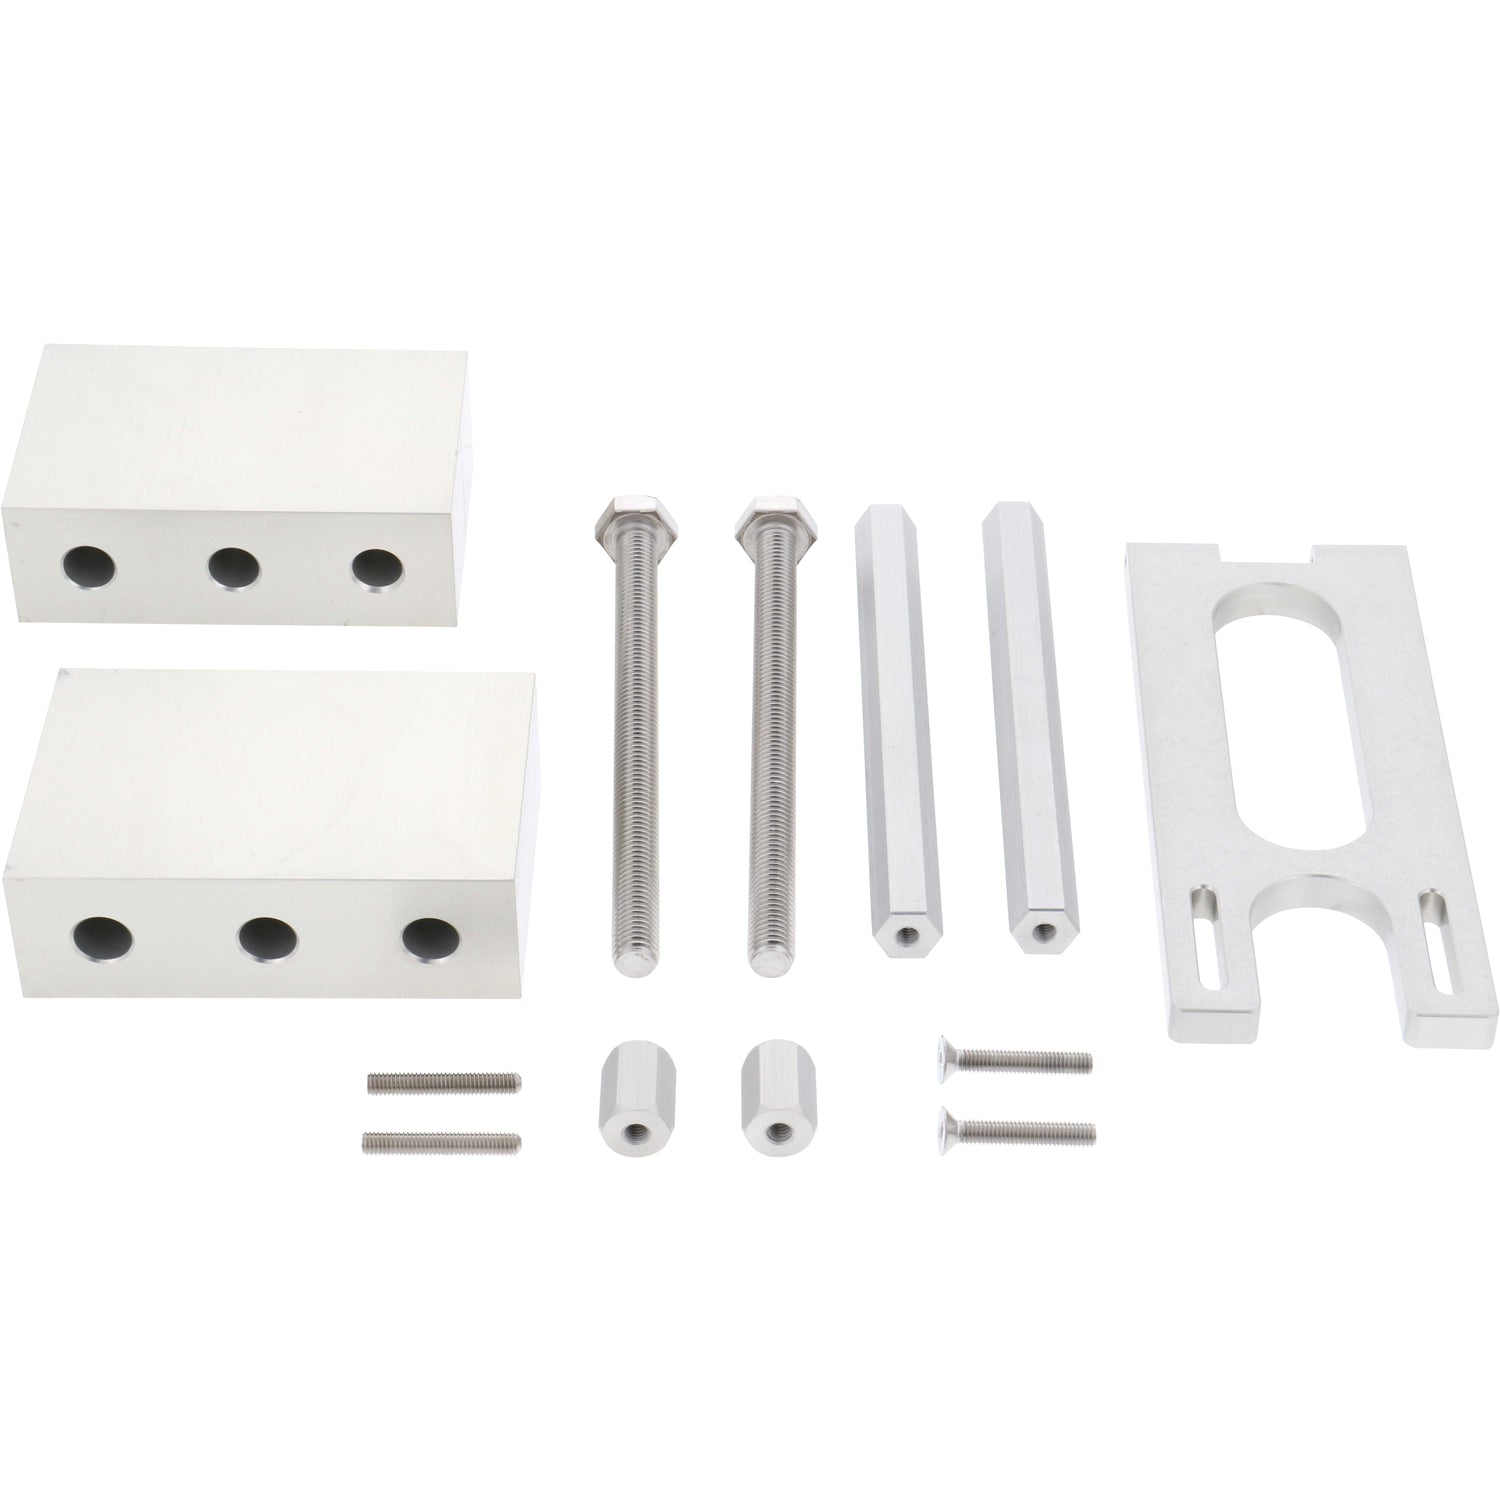 An assortment of small parts that include two hard anodized aluminum seamer blocks, four anodized aluminum threaded hexagonal standoffs, six stainless steel fasteners and one hard anodized aluminum sensor mounting bracket. All parts are shown on a white background